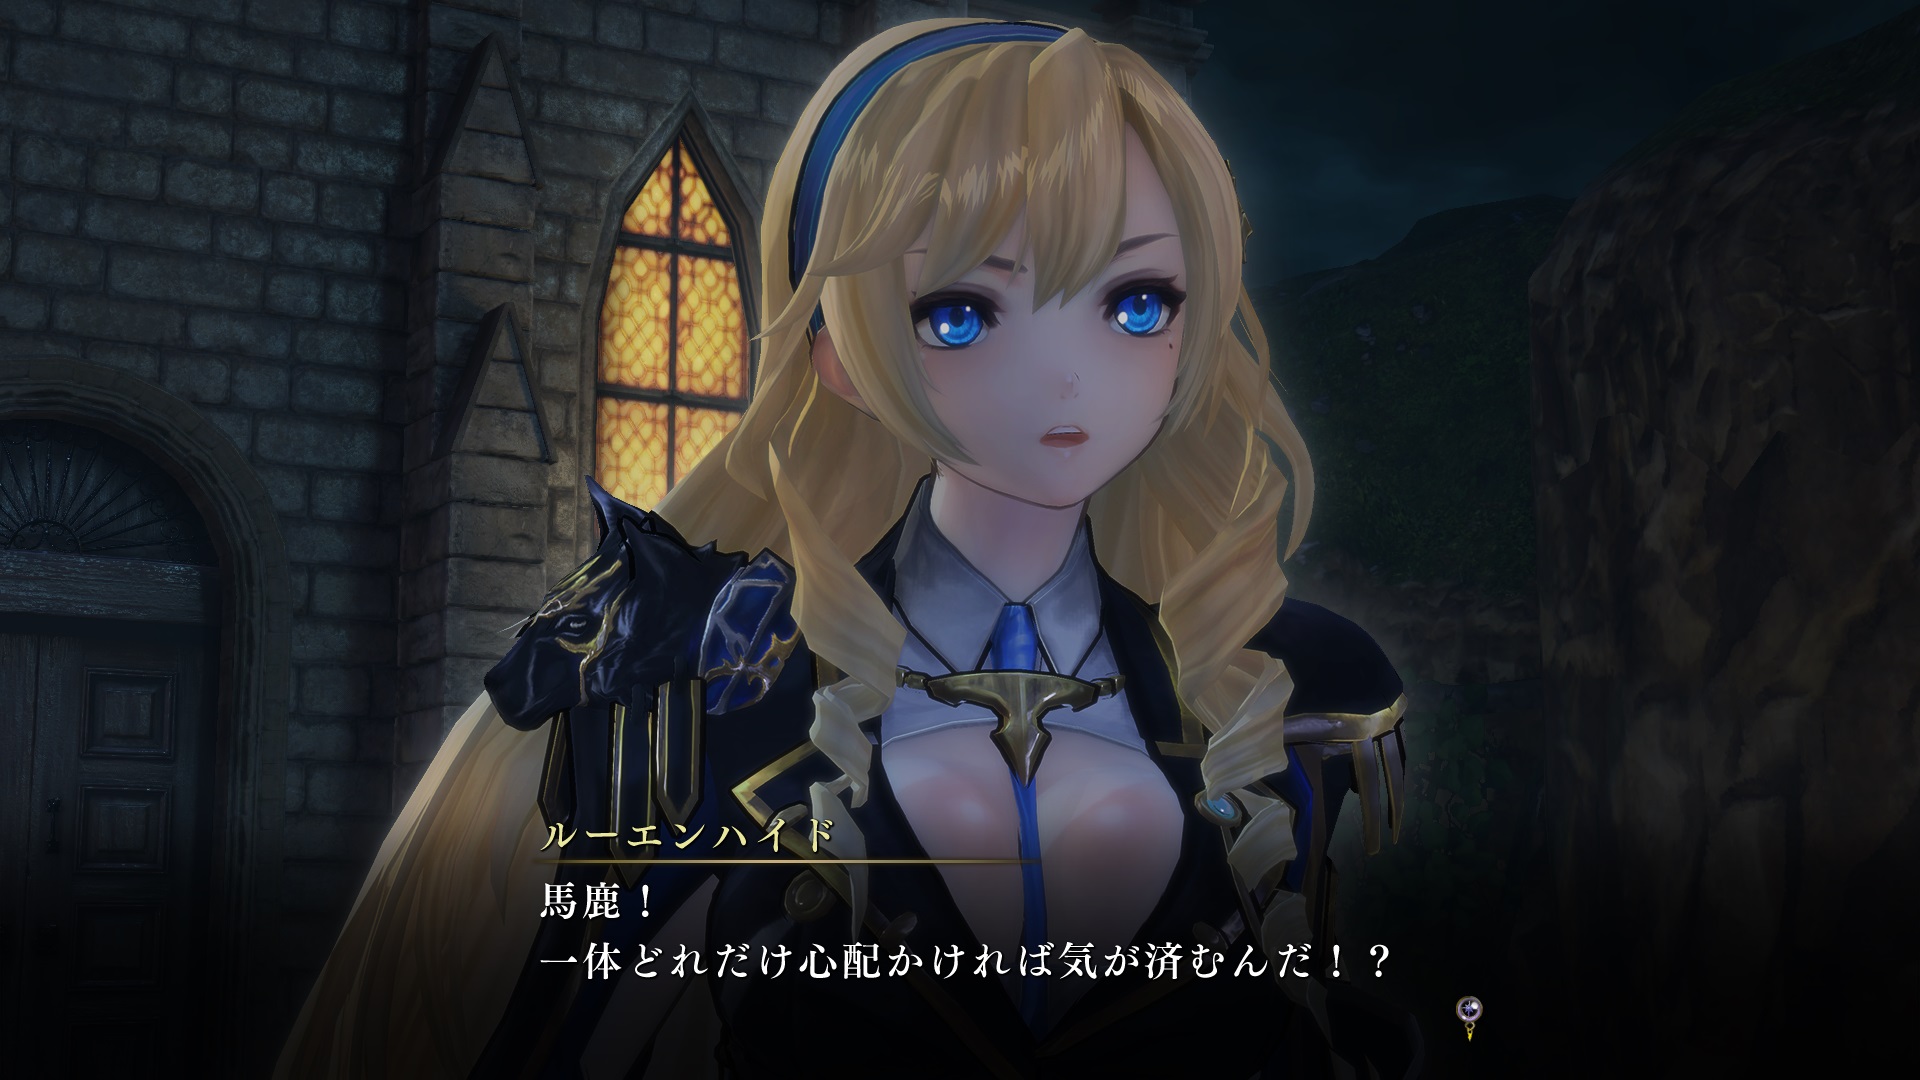 Azur 2. Nights of Azure 2: Bride of the New Moon. Nights of Azure. Nights of Azure 2 Bride of the New Moon Transformations. Nights of Azure 2 Camilla.